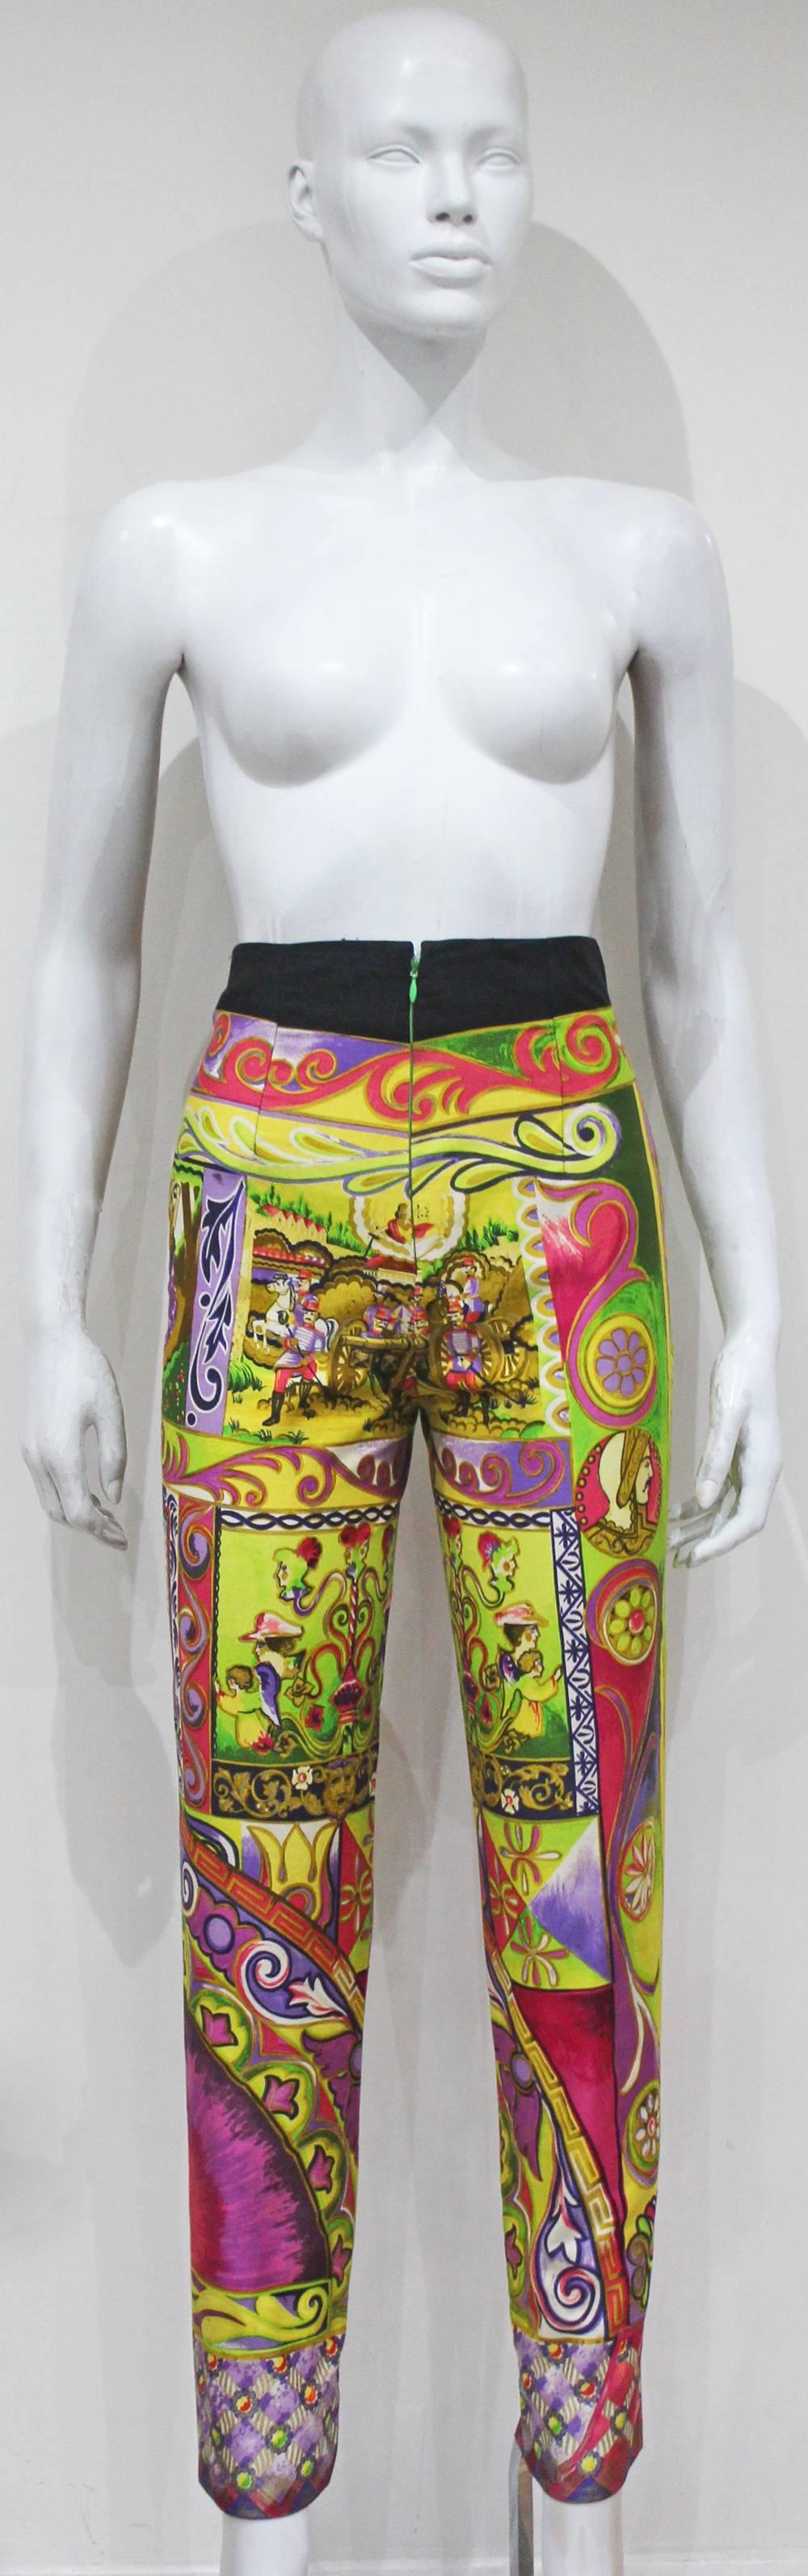 Spring/Summer 1992 

Slim fit high waisted cotton pants in vibrant illustrated print. 

It 38 - Fr 34 - UK 6 - XS/S